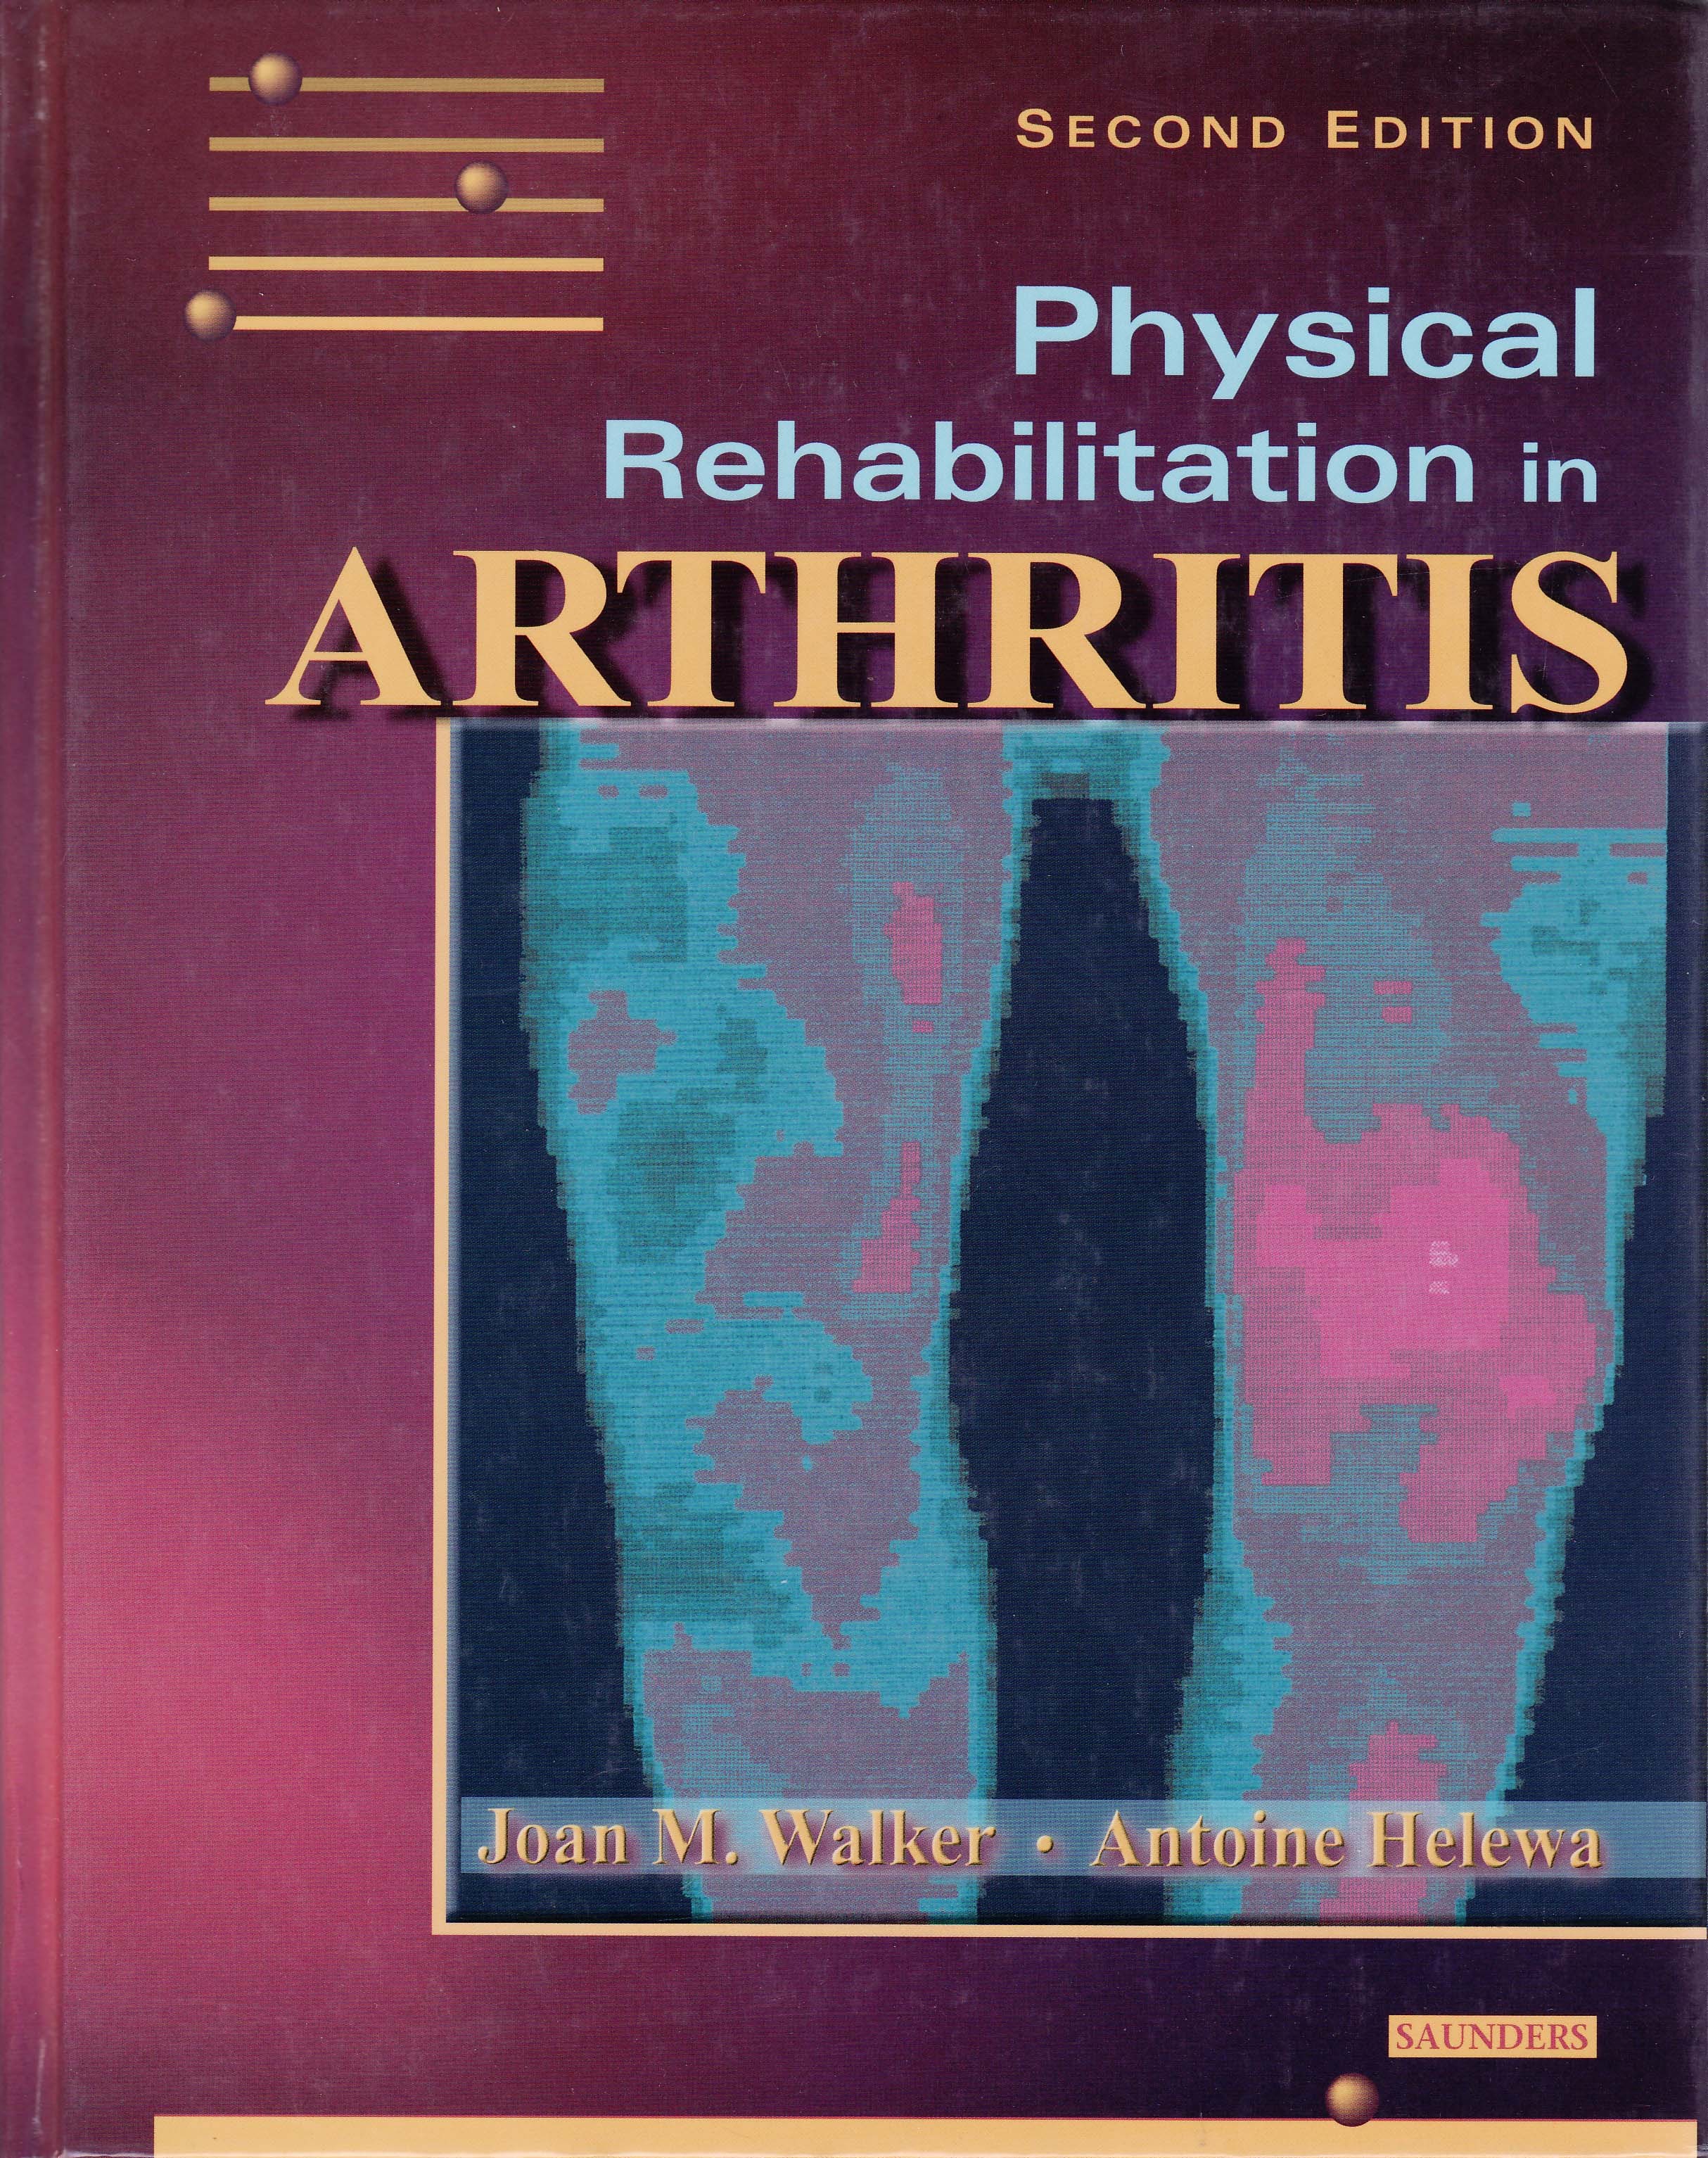 Share a Course: Physical Rehabilitation in Arthritis: Module 1 (Electronic Download) 